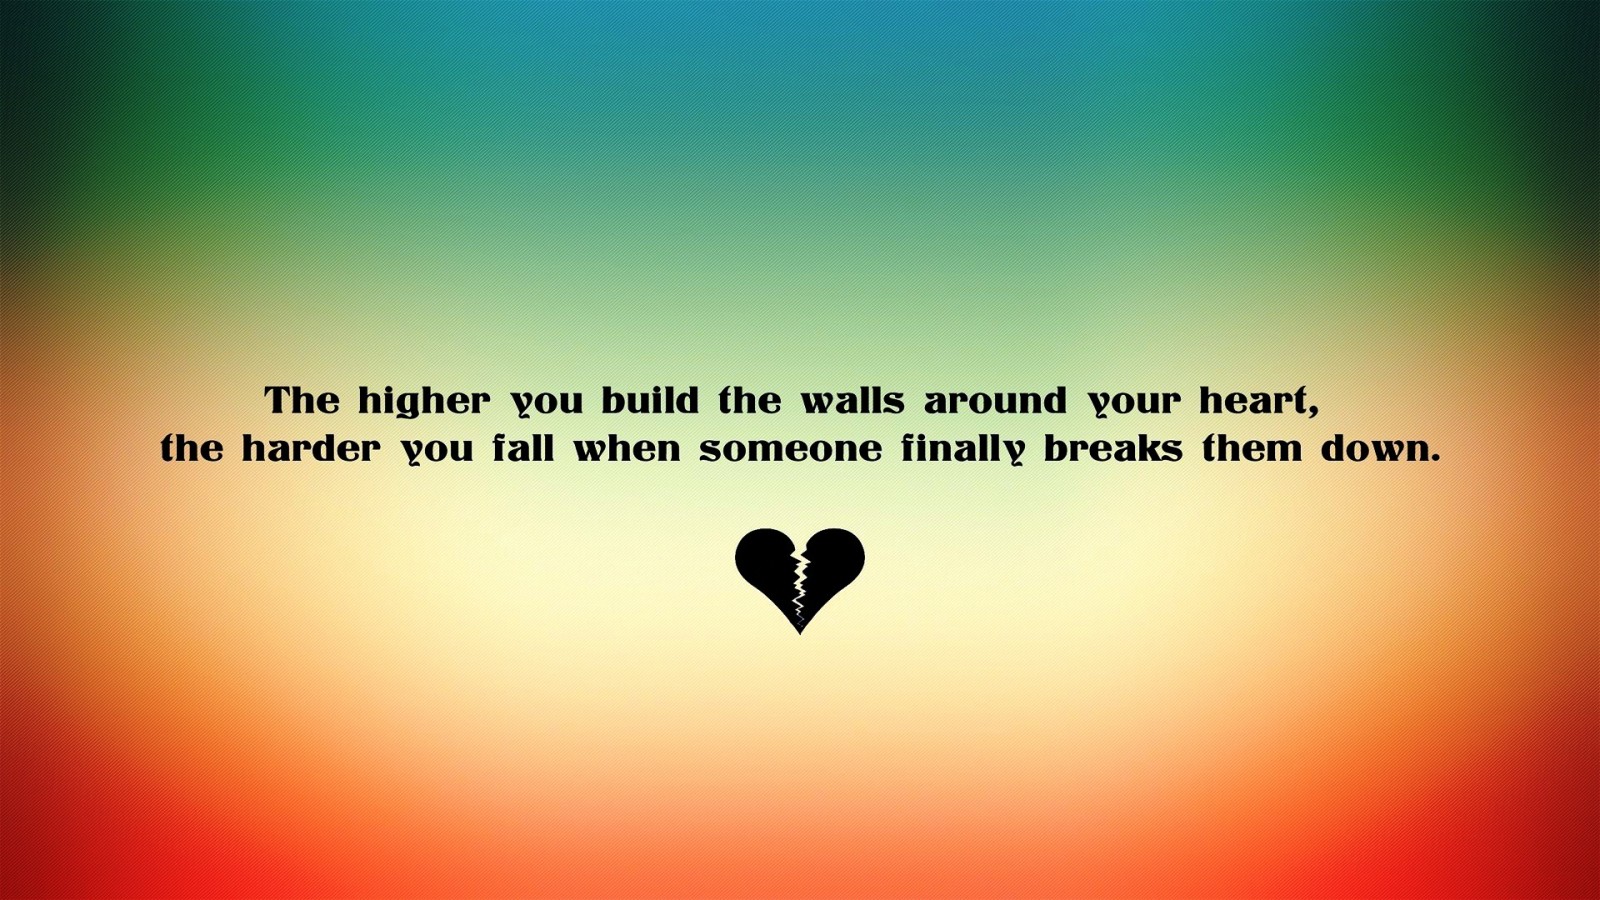 The higher you build the walls around your heart, the harder you fall for someone who tears them down